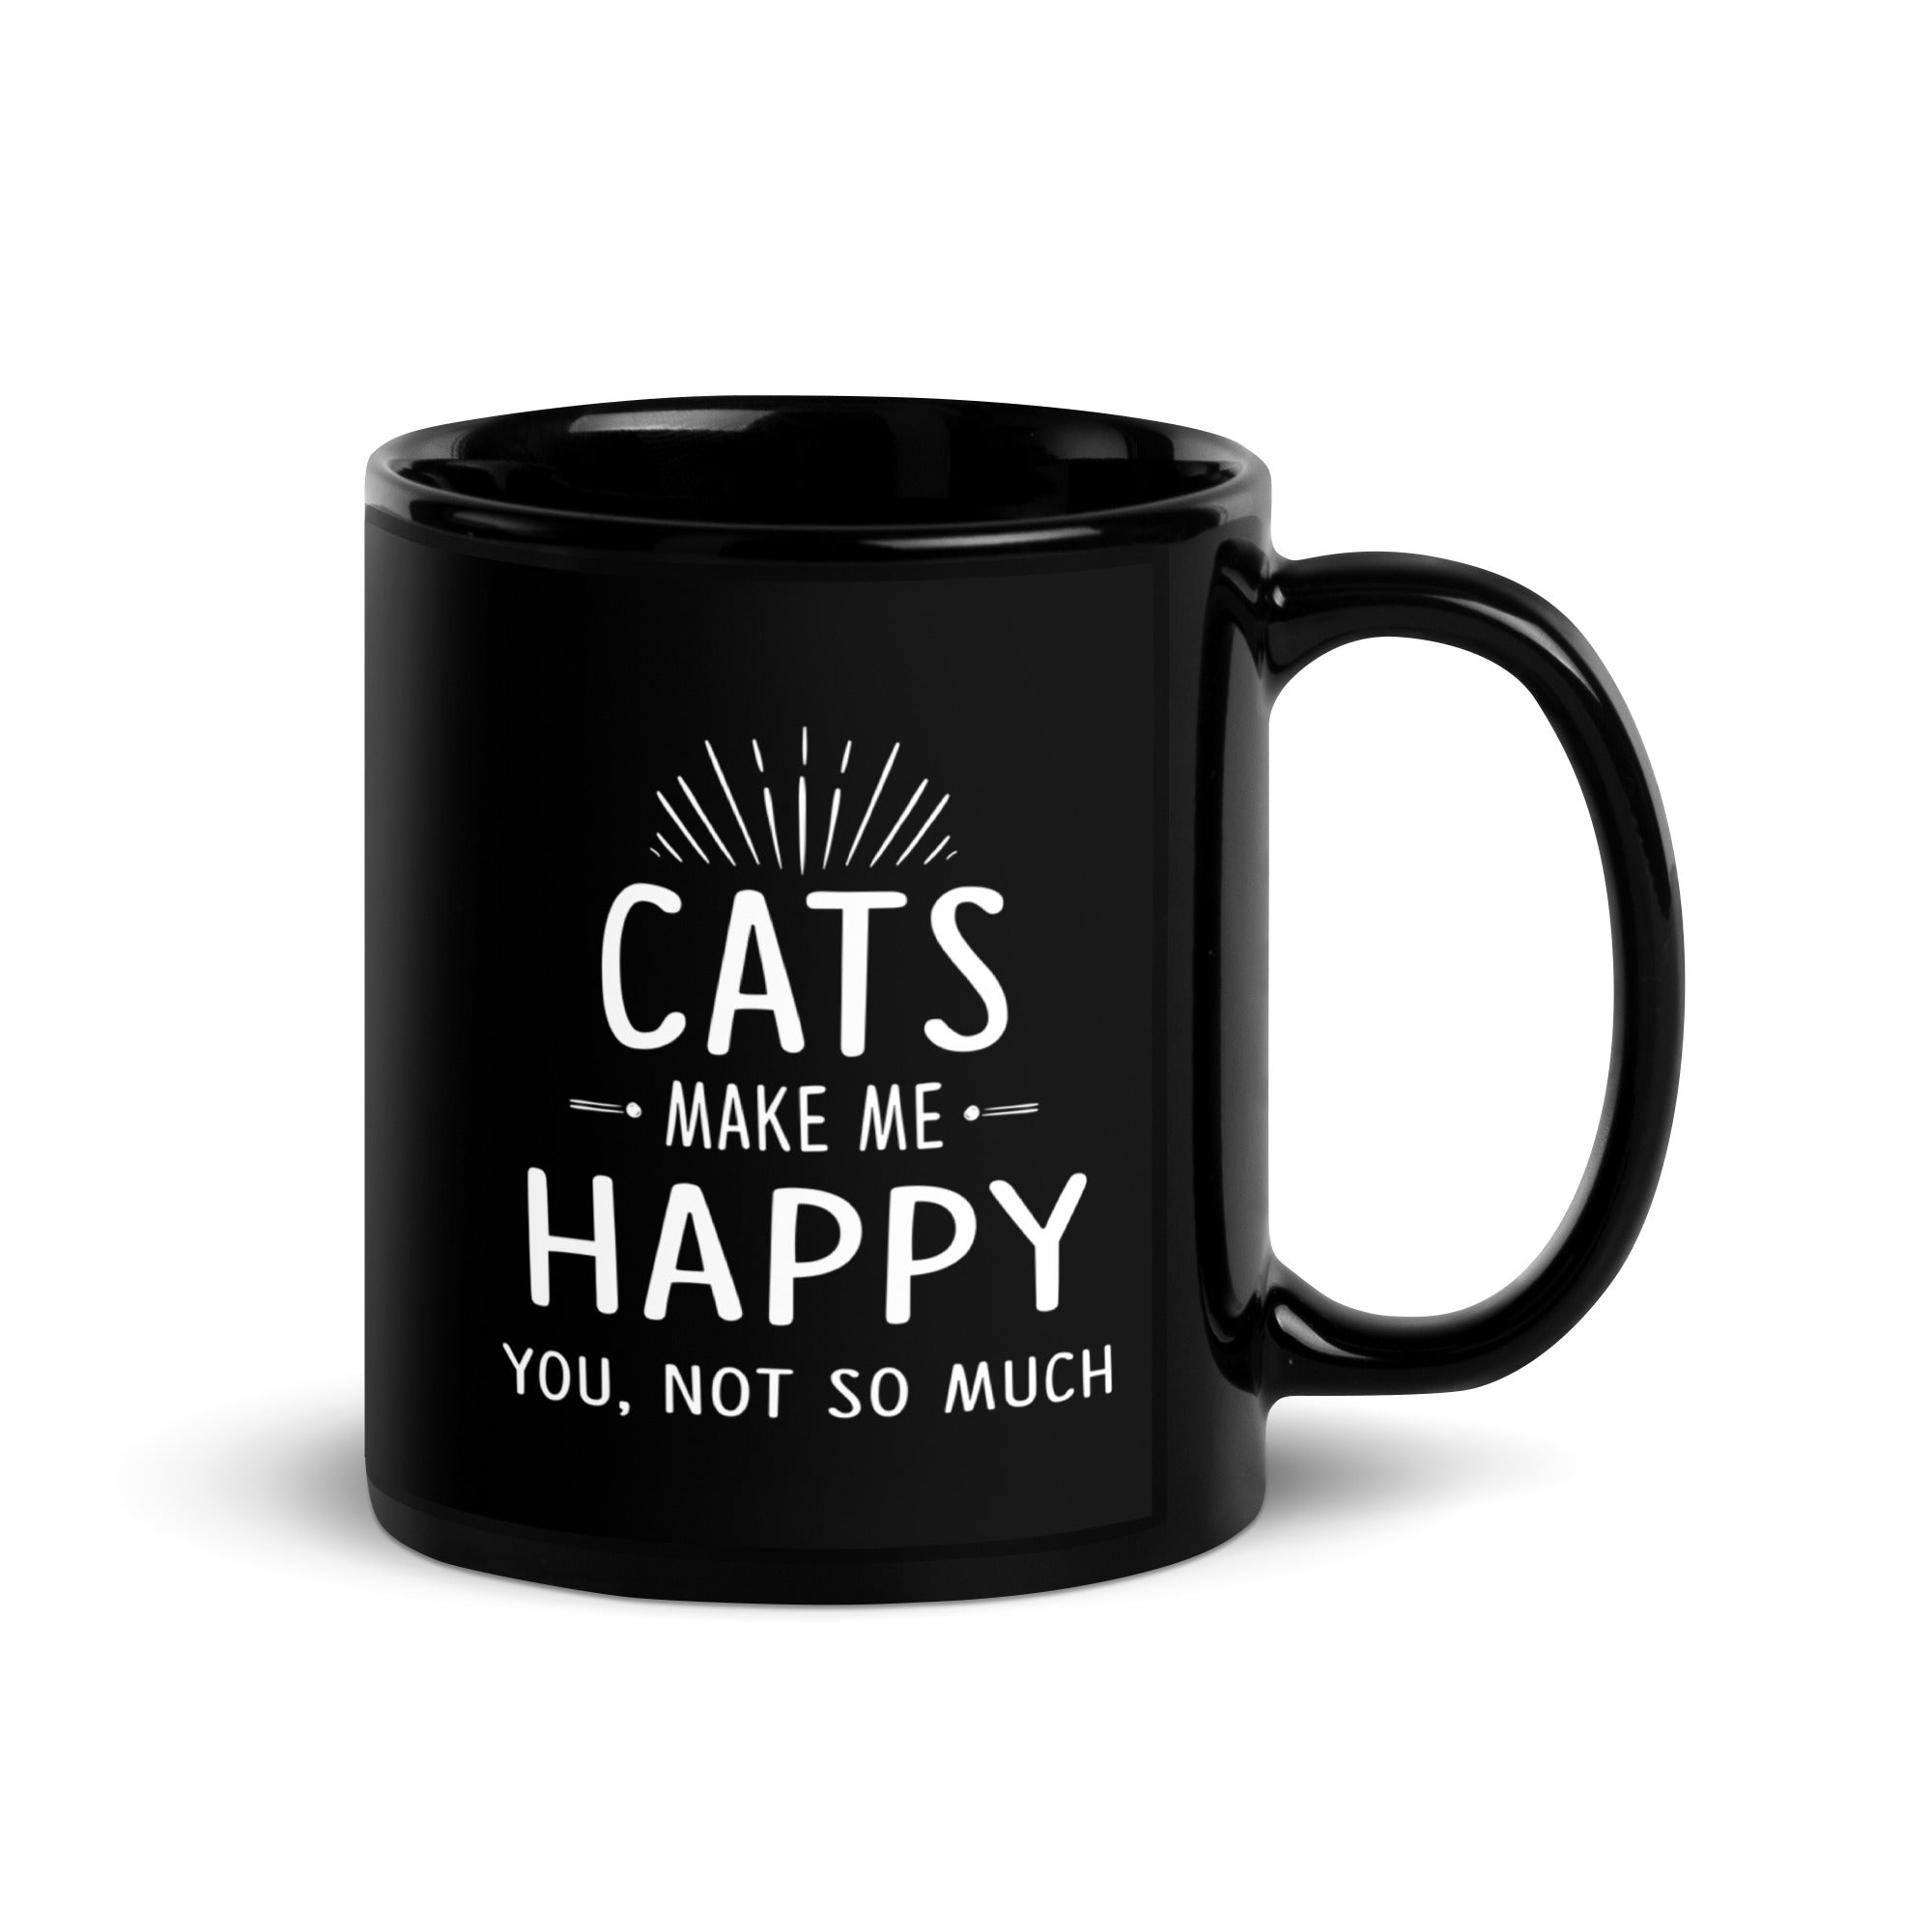 Cat Make Me Happy, You Not So Much, cat lovers, black cat